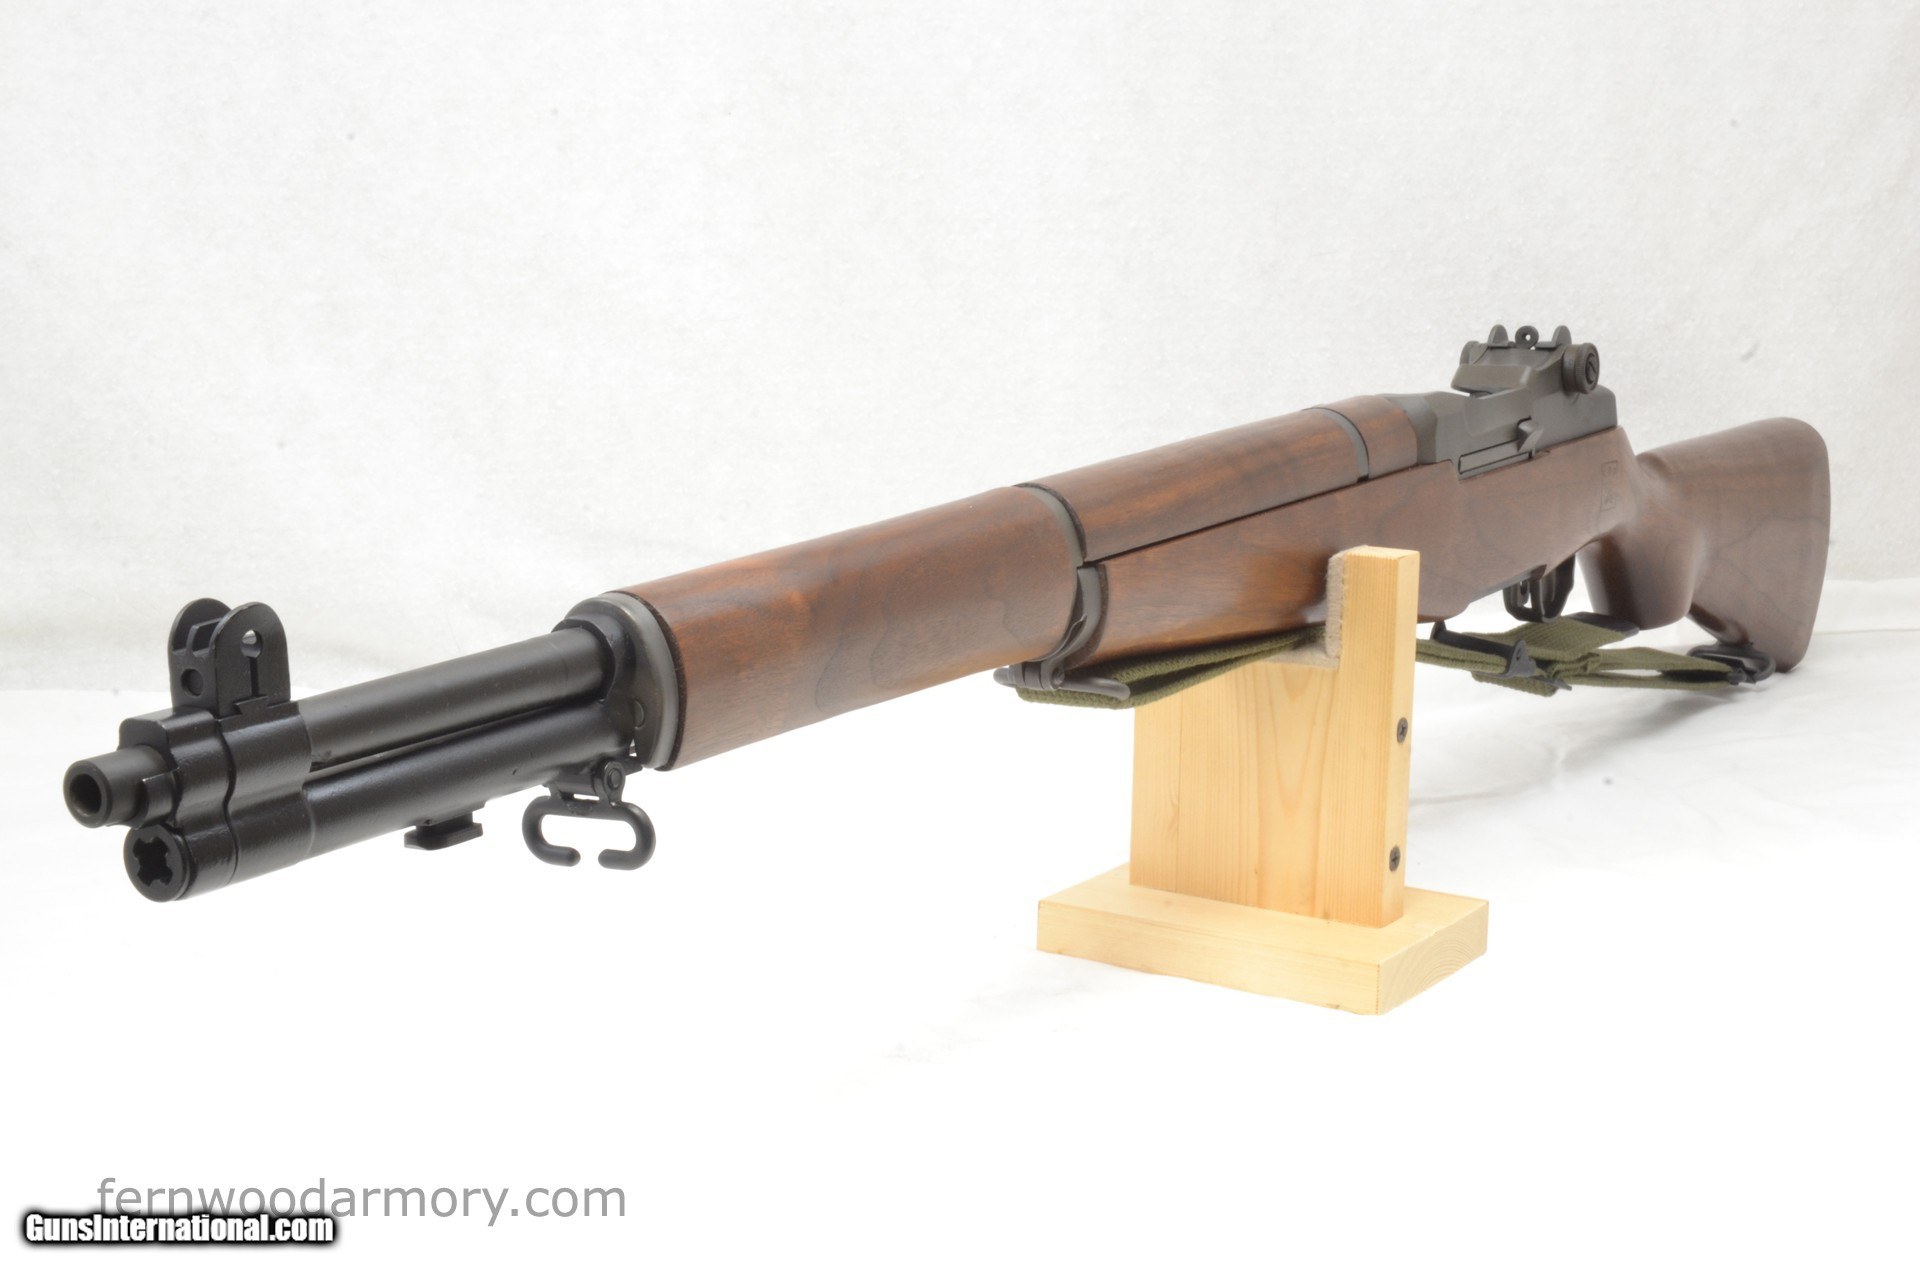 Fresh from the CMP's North Store - 1942 6-digit S/N Springfield Armory M1  Garand (Service Grade) : r/liberalgunowners